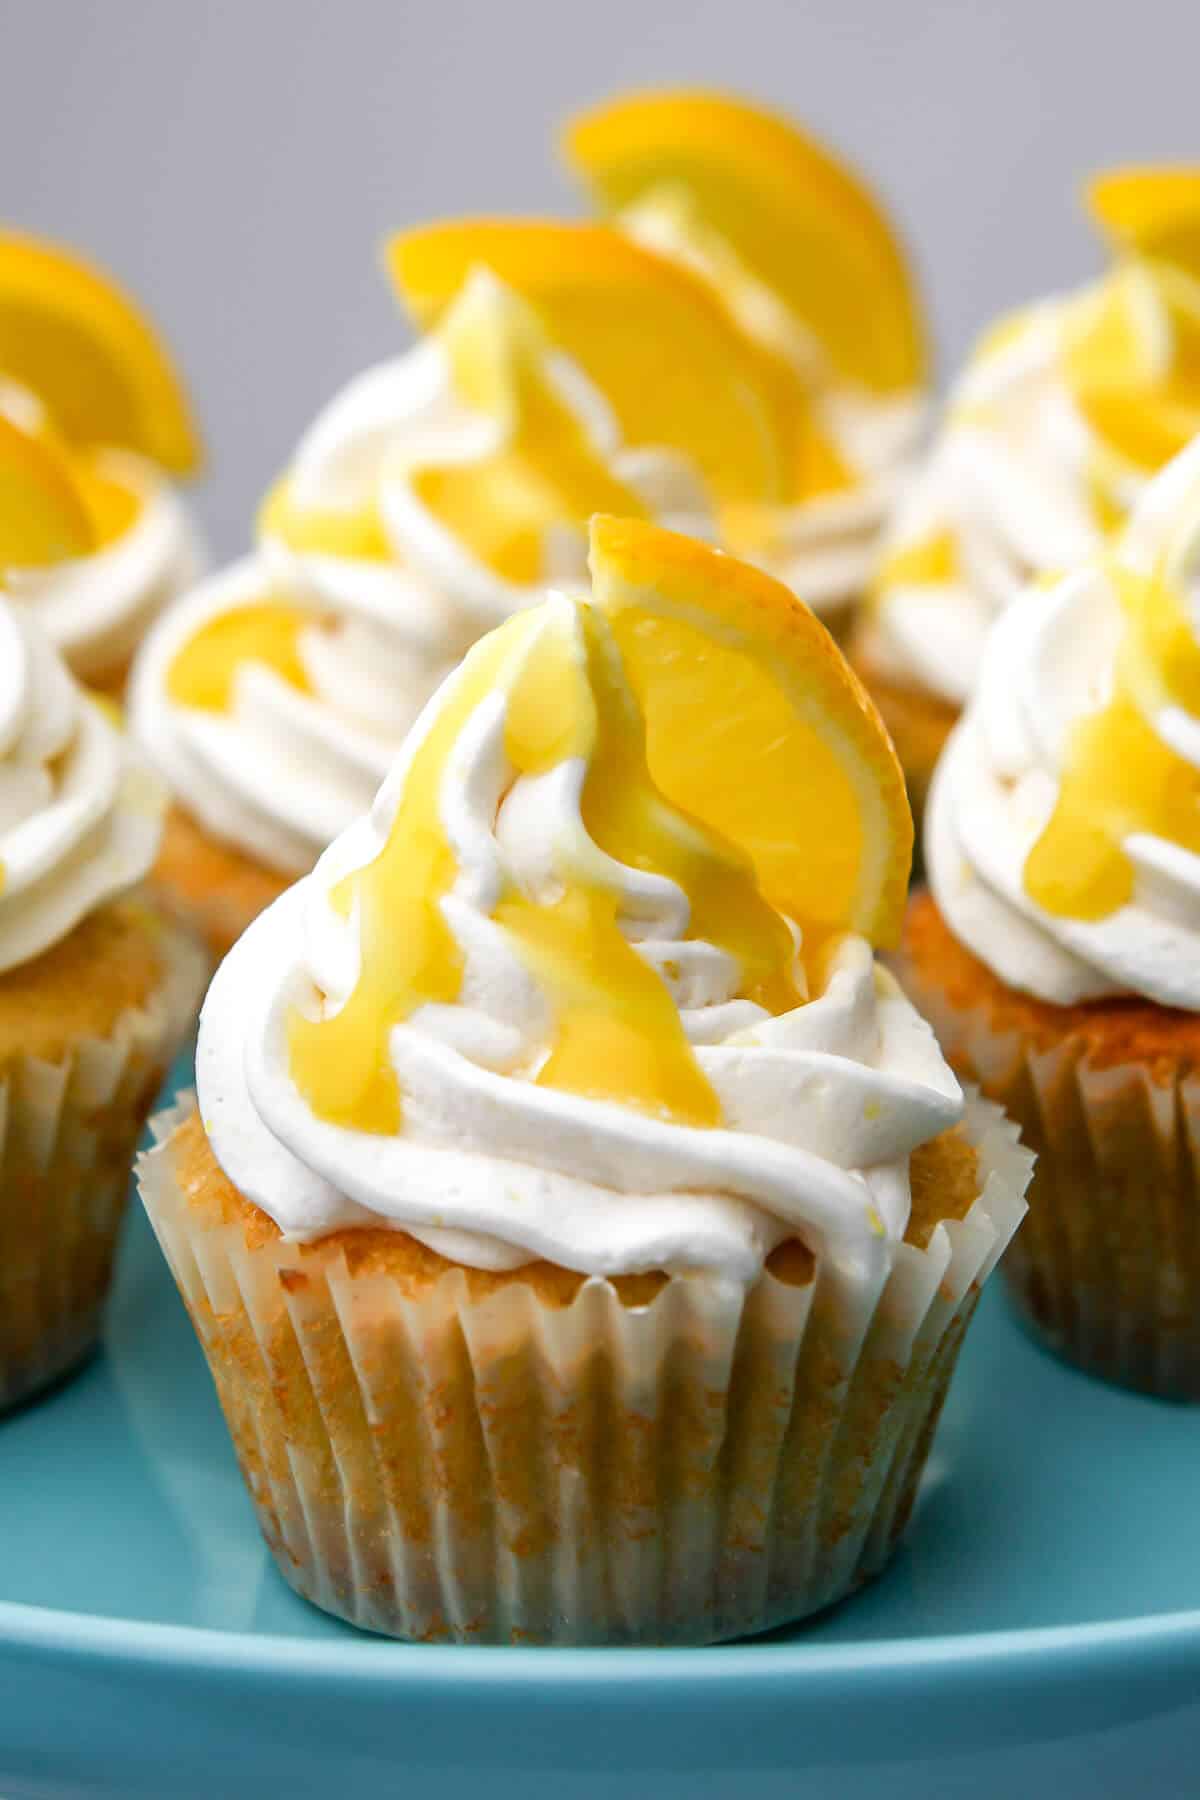 Vegan lemon frosting on cupcakes that are sitting on a blue cake dish.